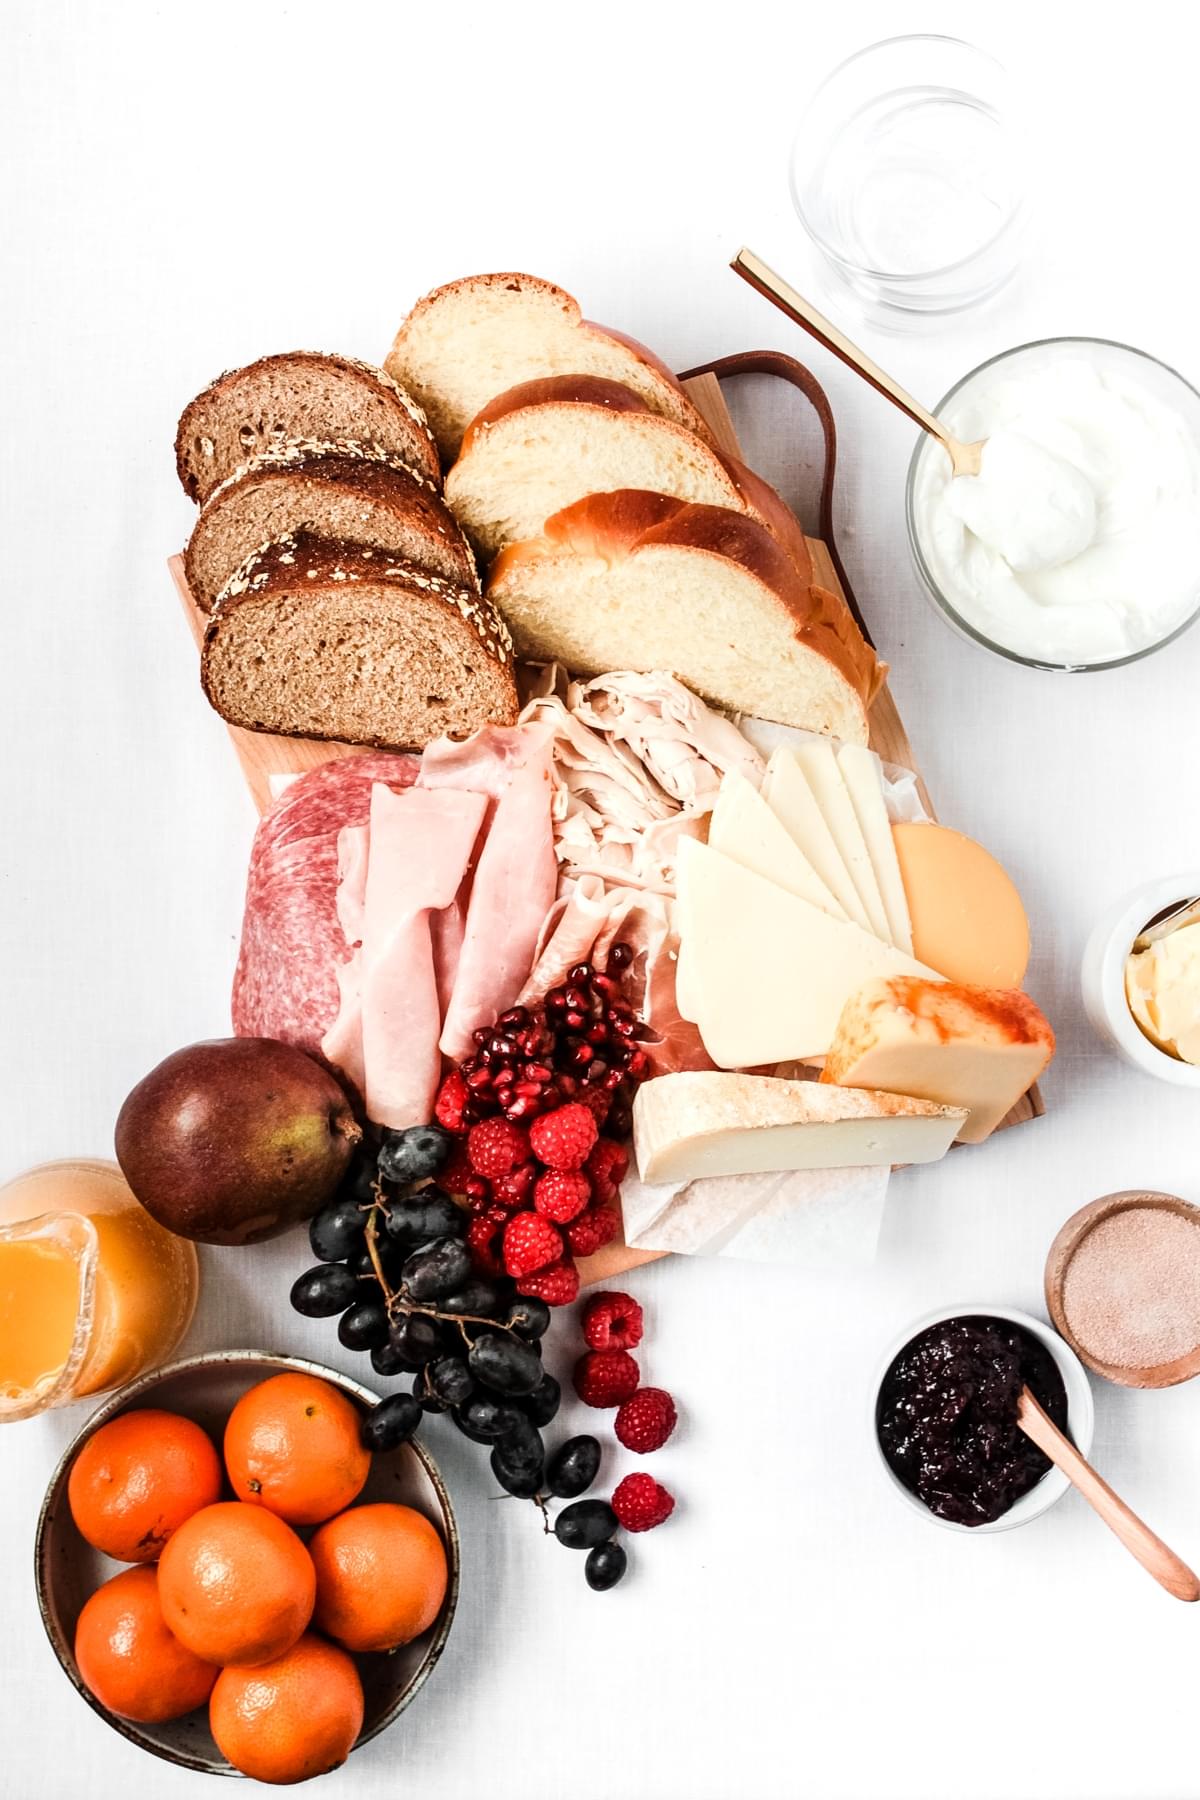 thanksgiving breakfast platter European style with cheese, bread, sliced meats, yogurt and fresh fruit